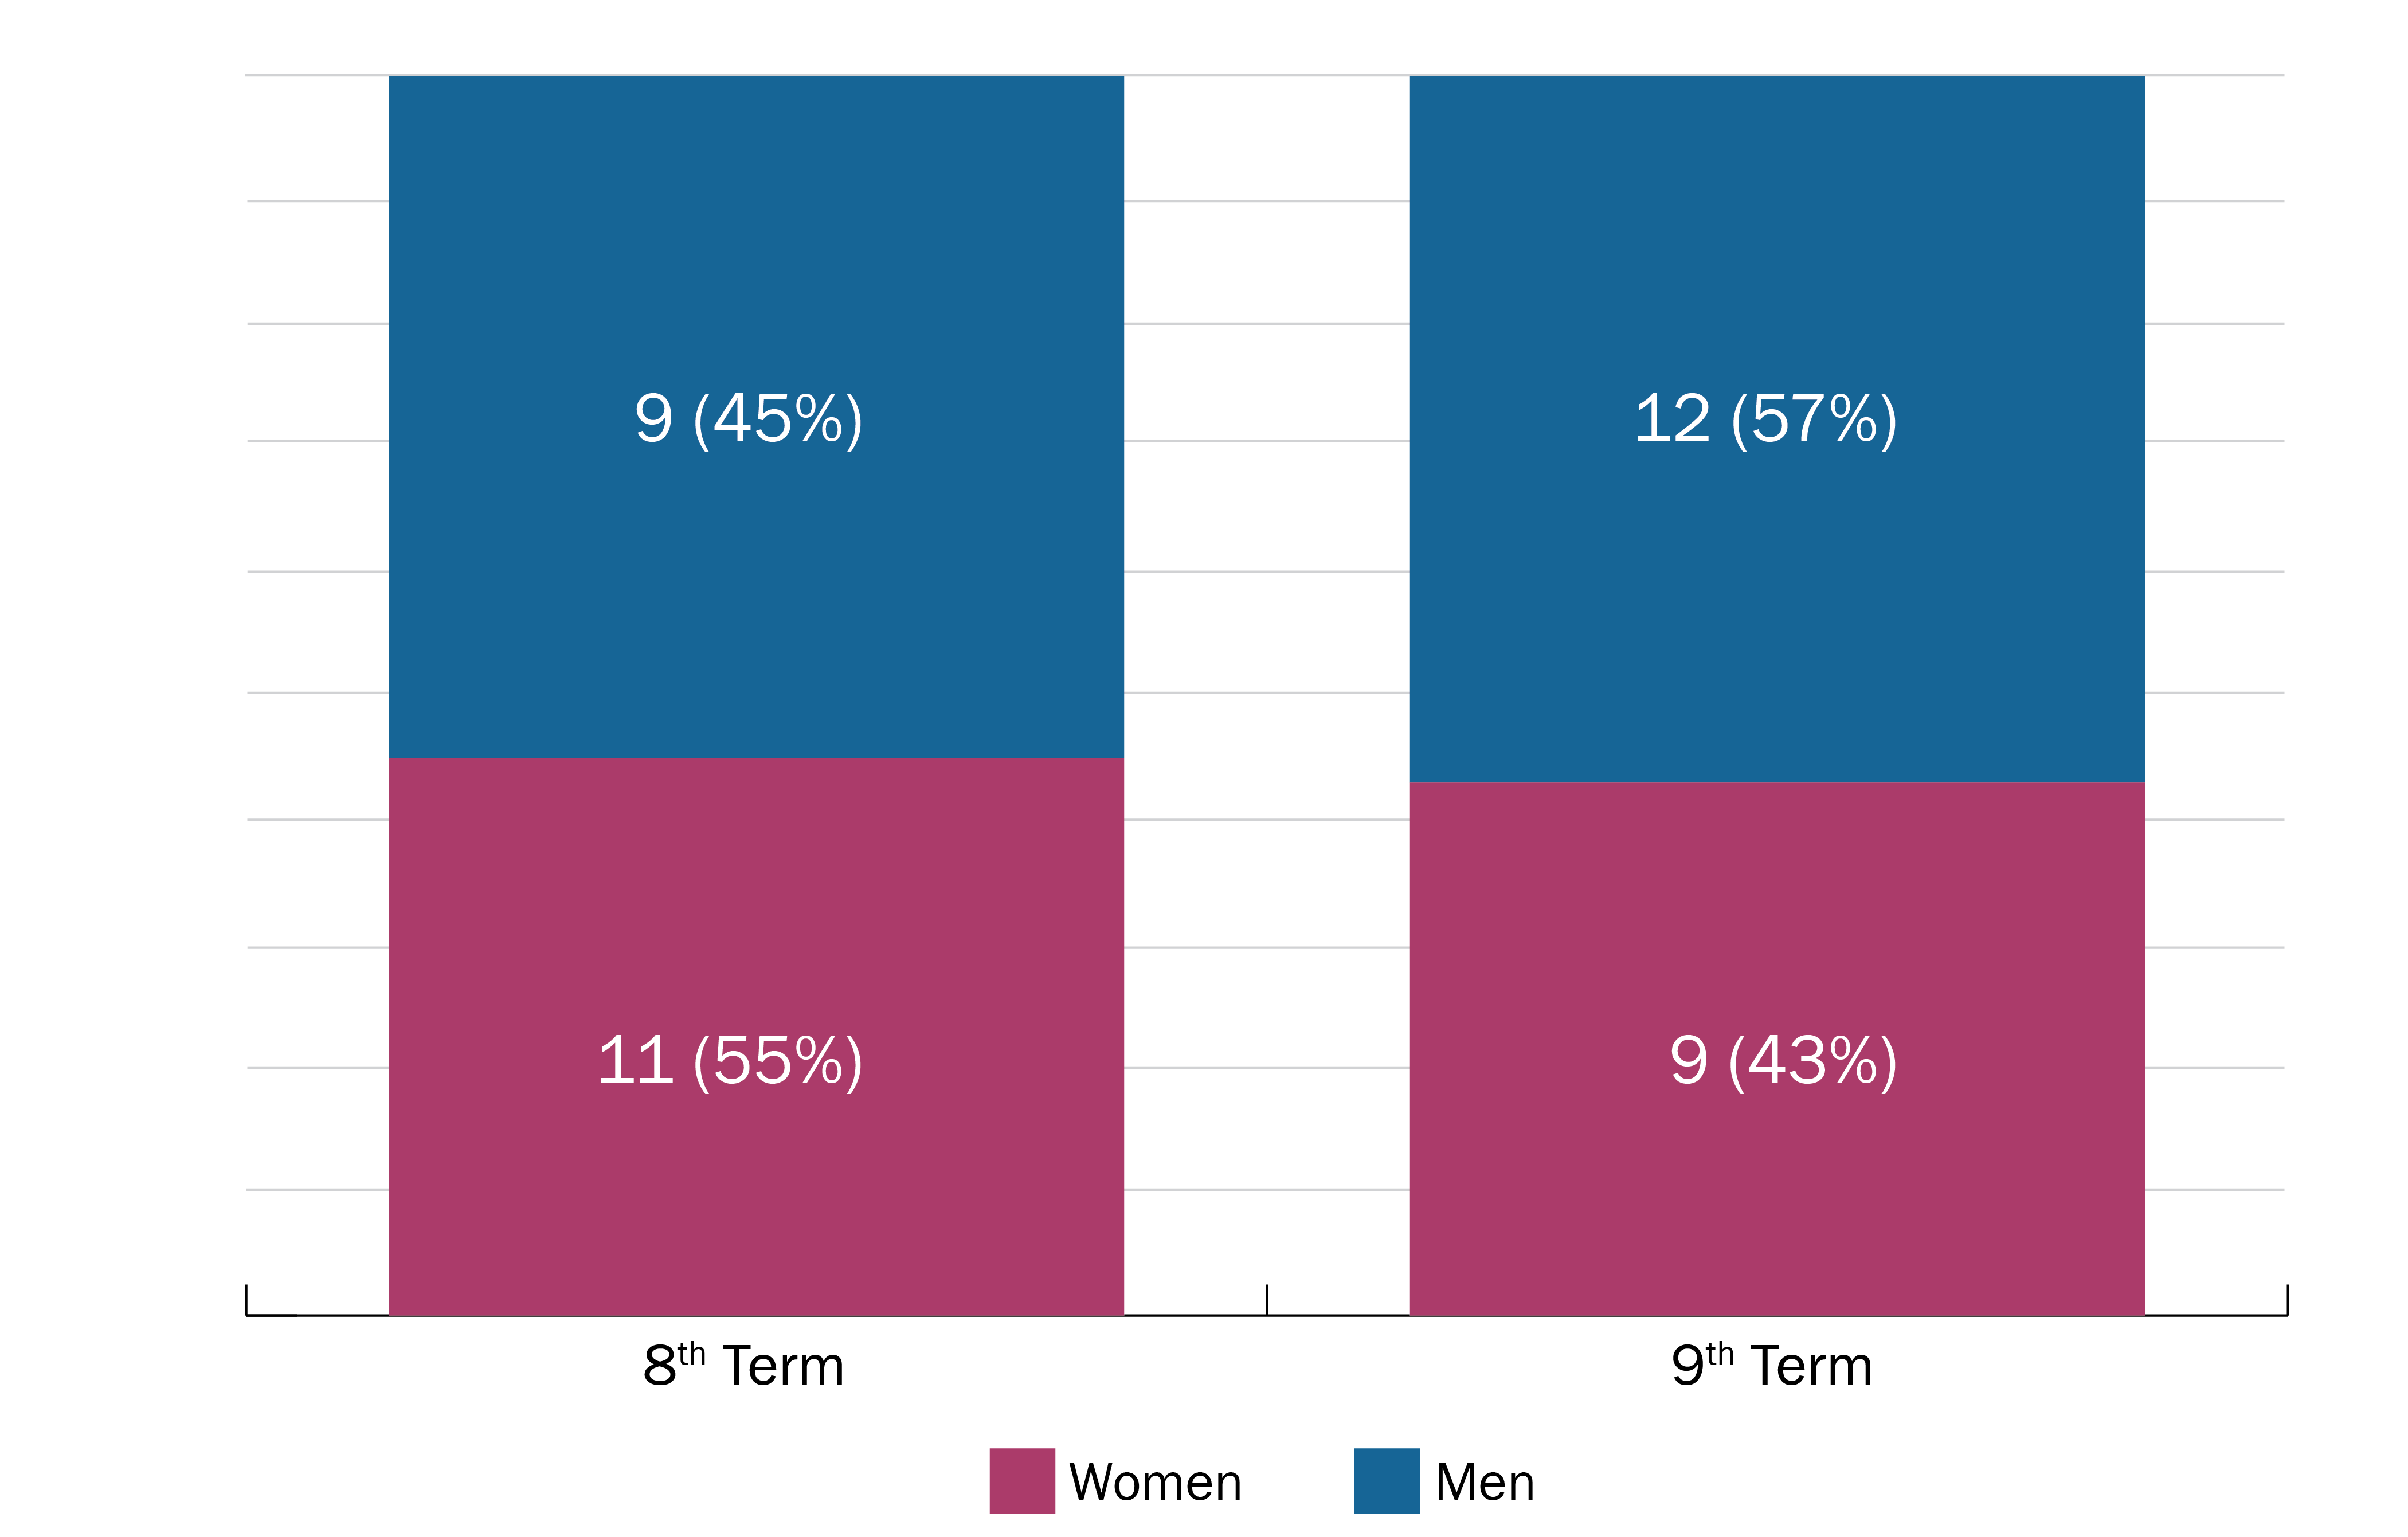 Figure 8. Proportion of Men and Women Committee Chairs. 